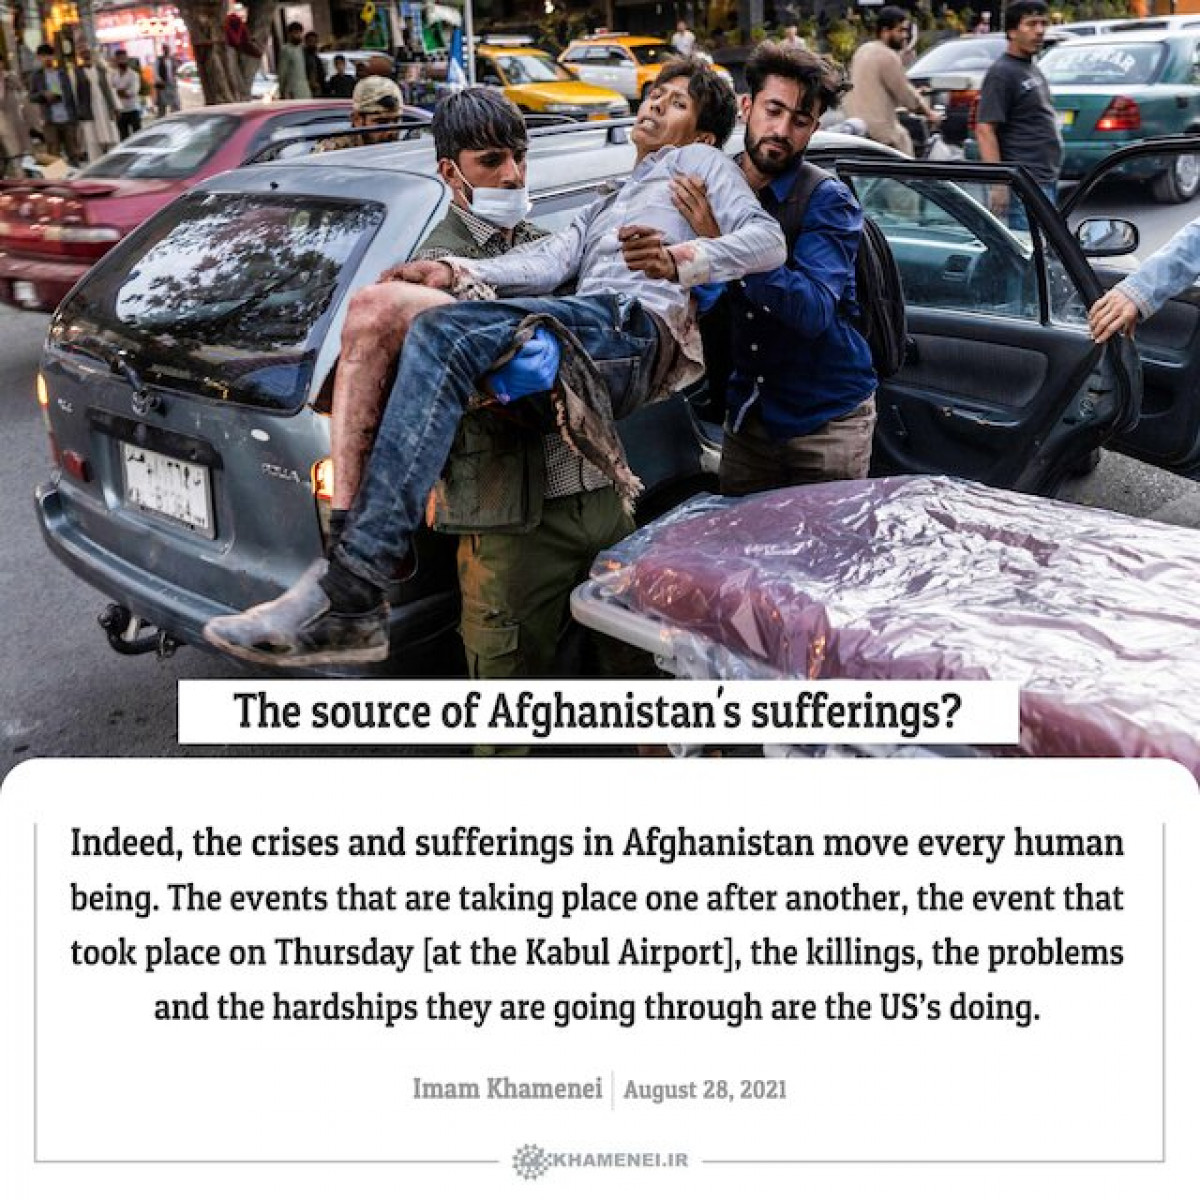 The source of Afghanistan's sufferings?